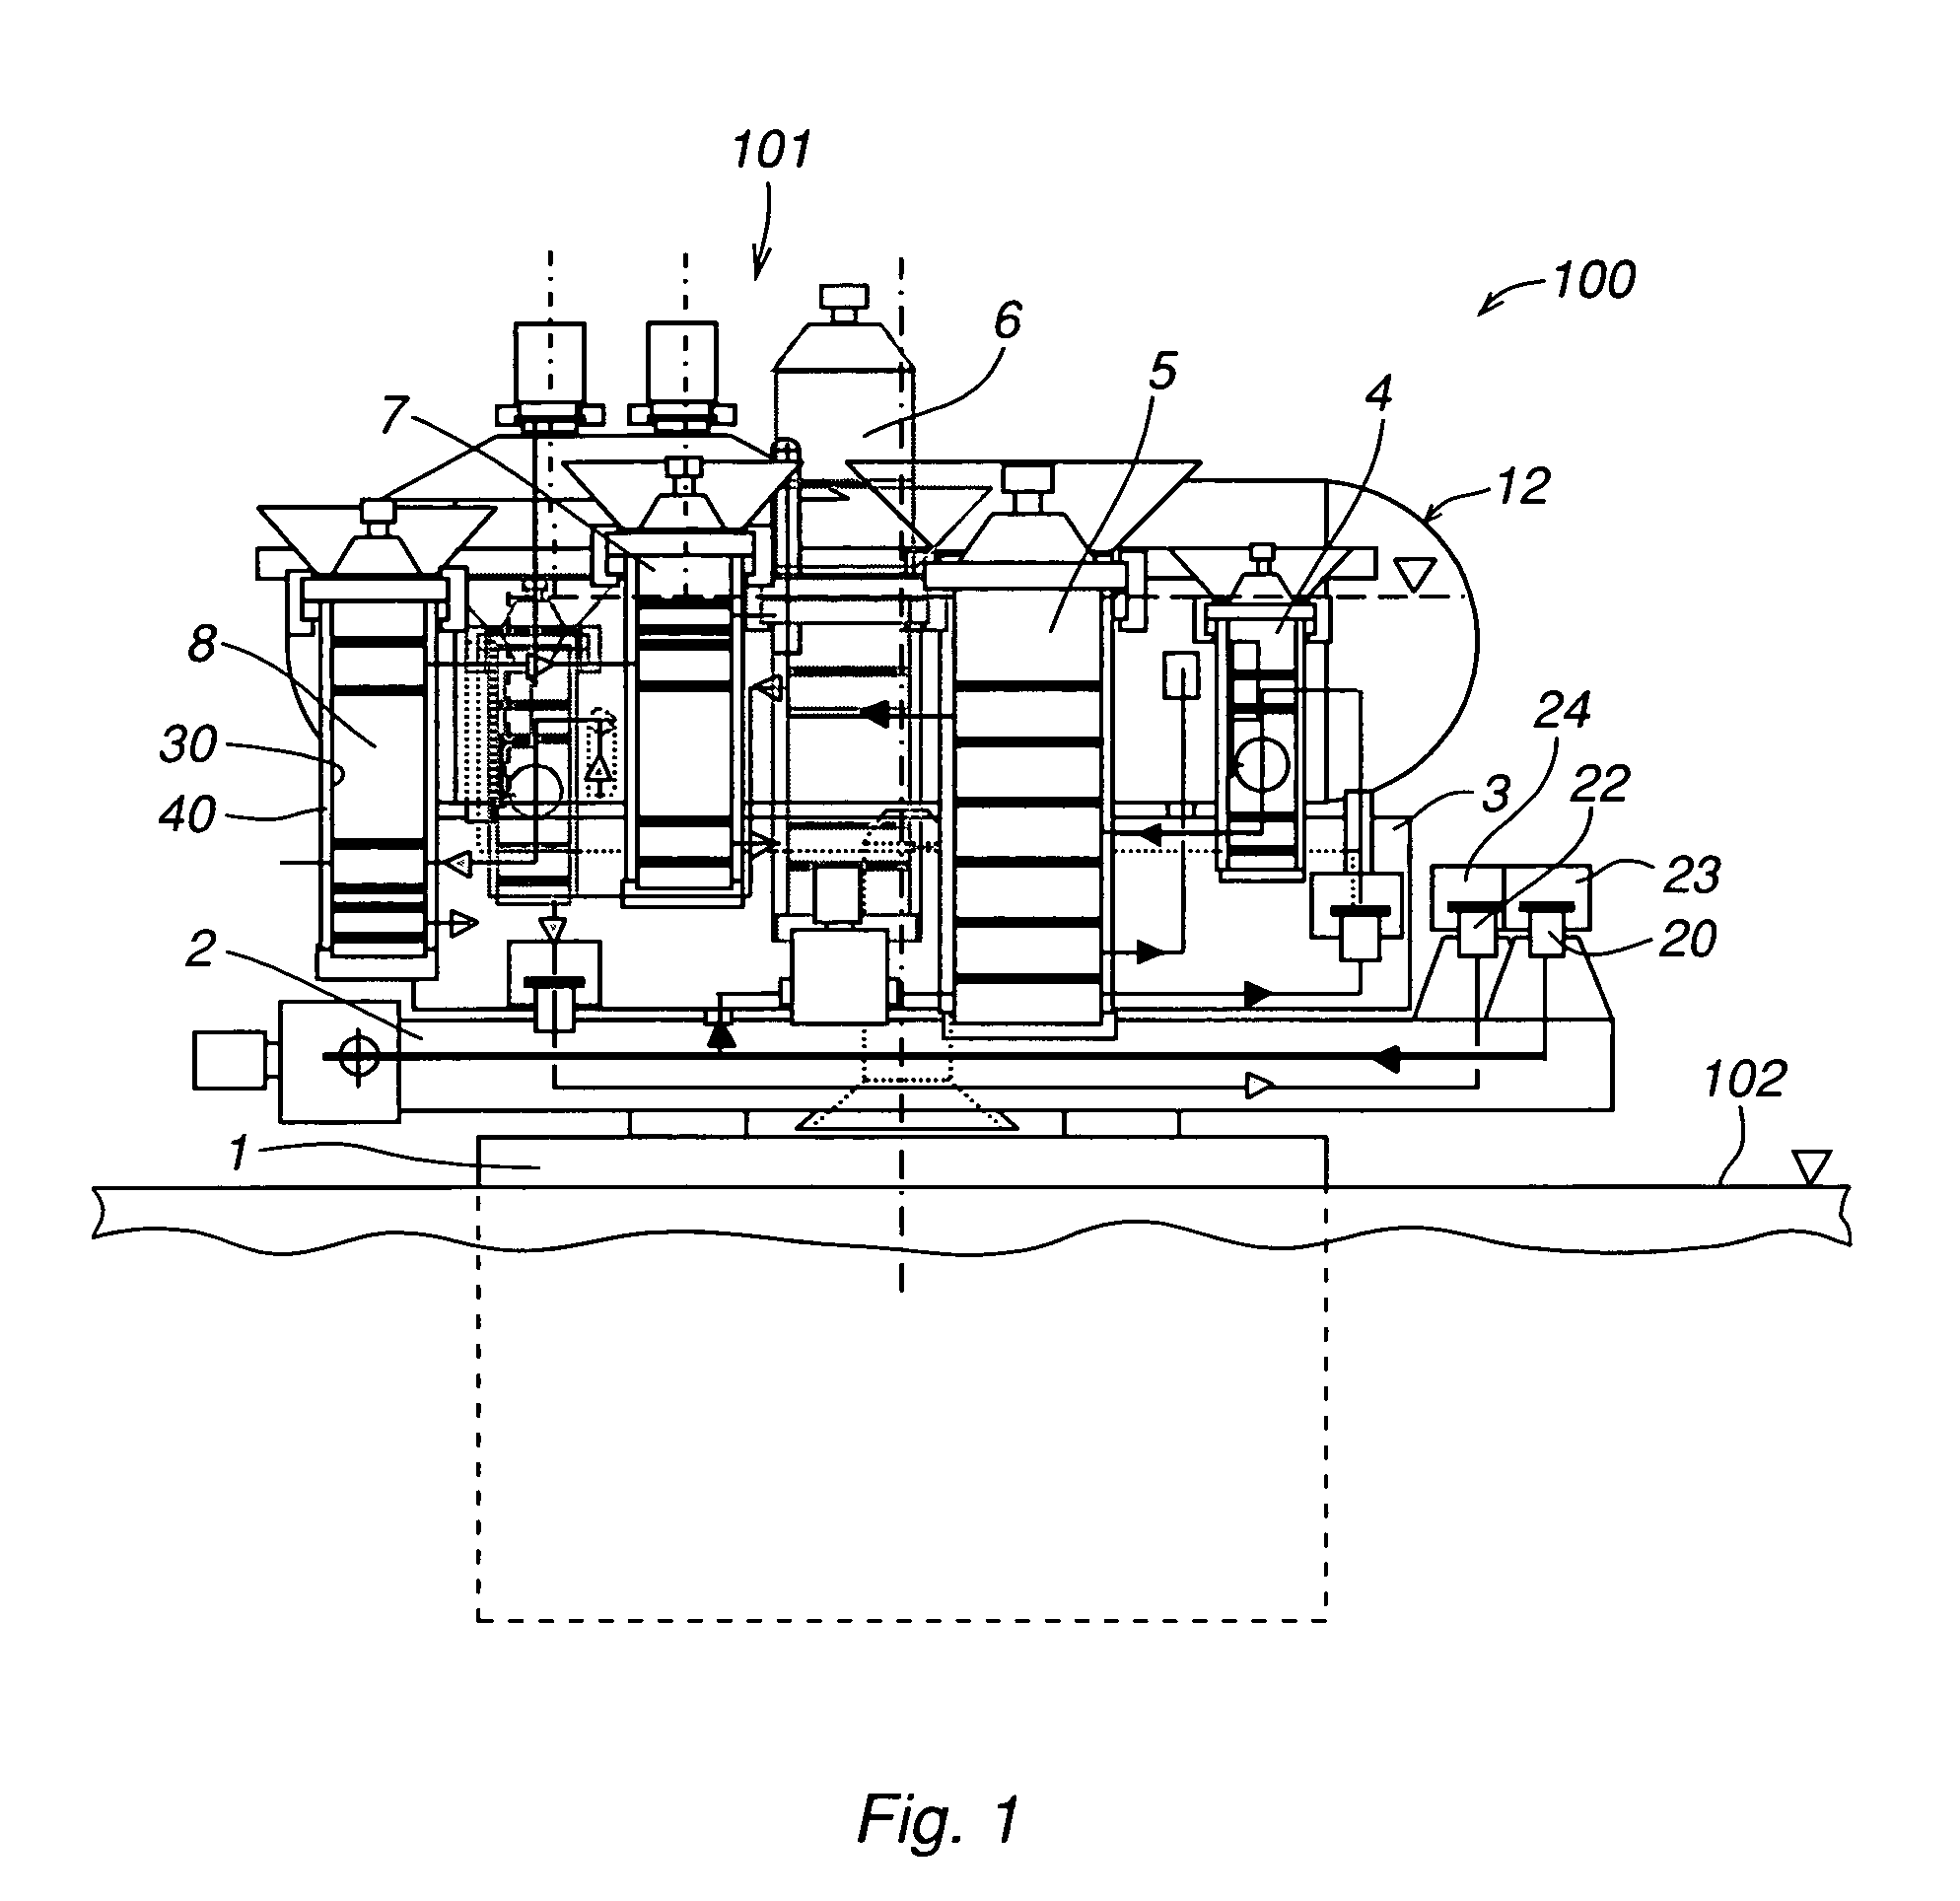 Subsea system for processing fluid